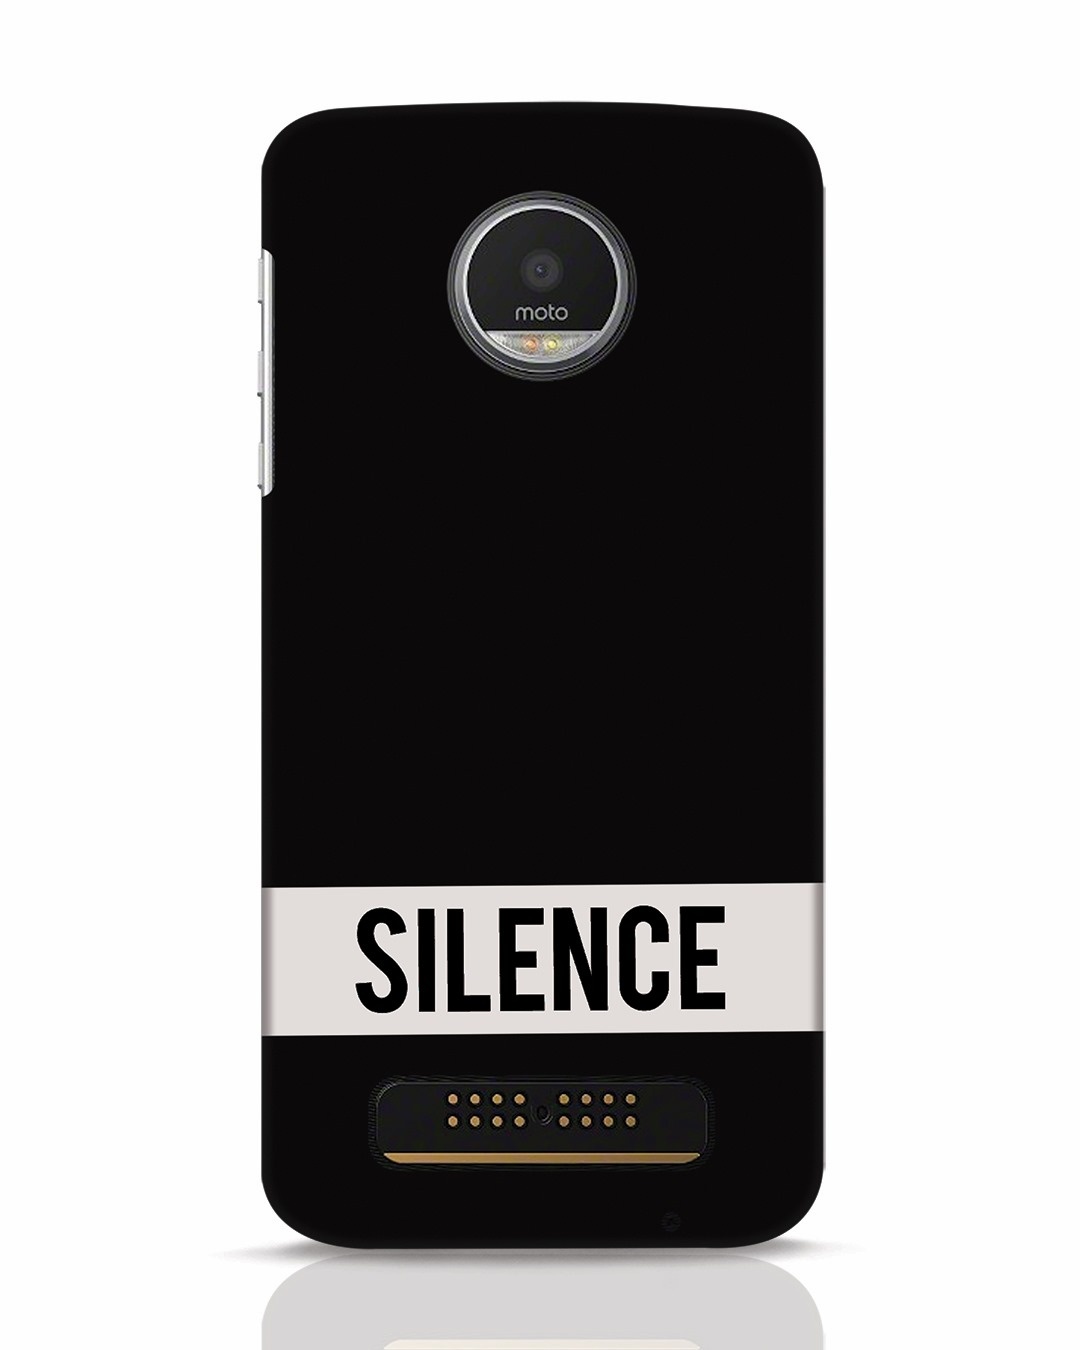 Silence Moto Z Play Mobile Cover Moto Z Play Mobile Covers Bewakoof.com